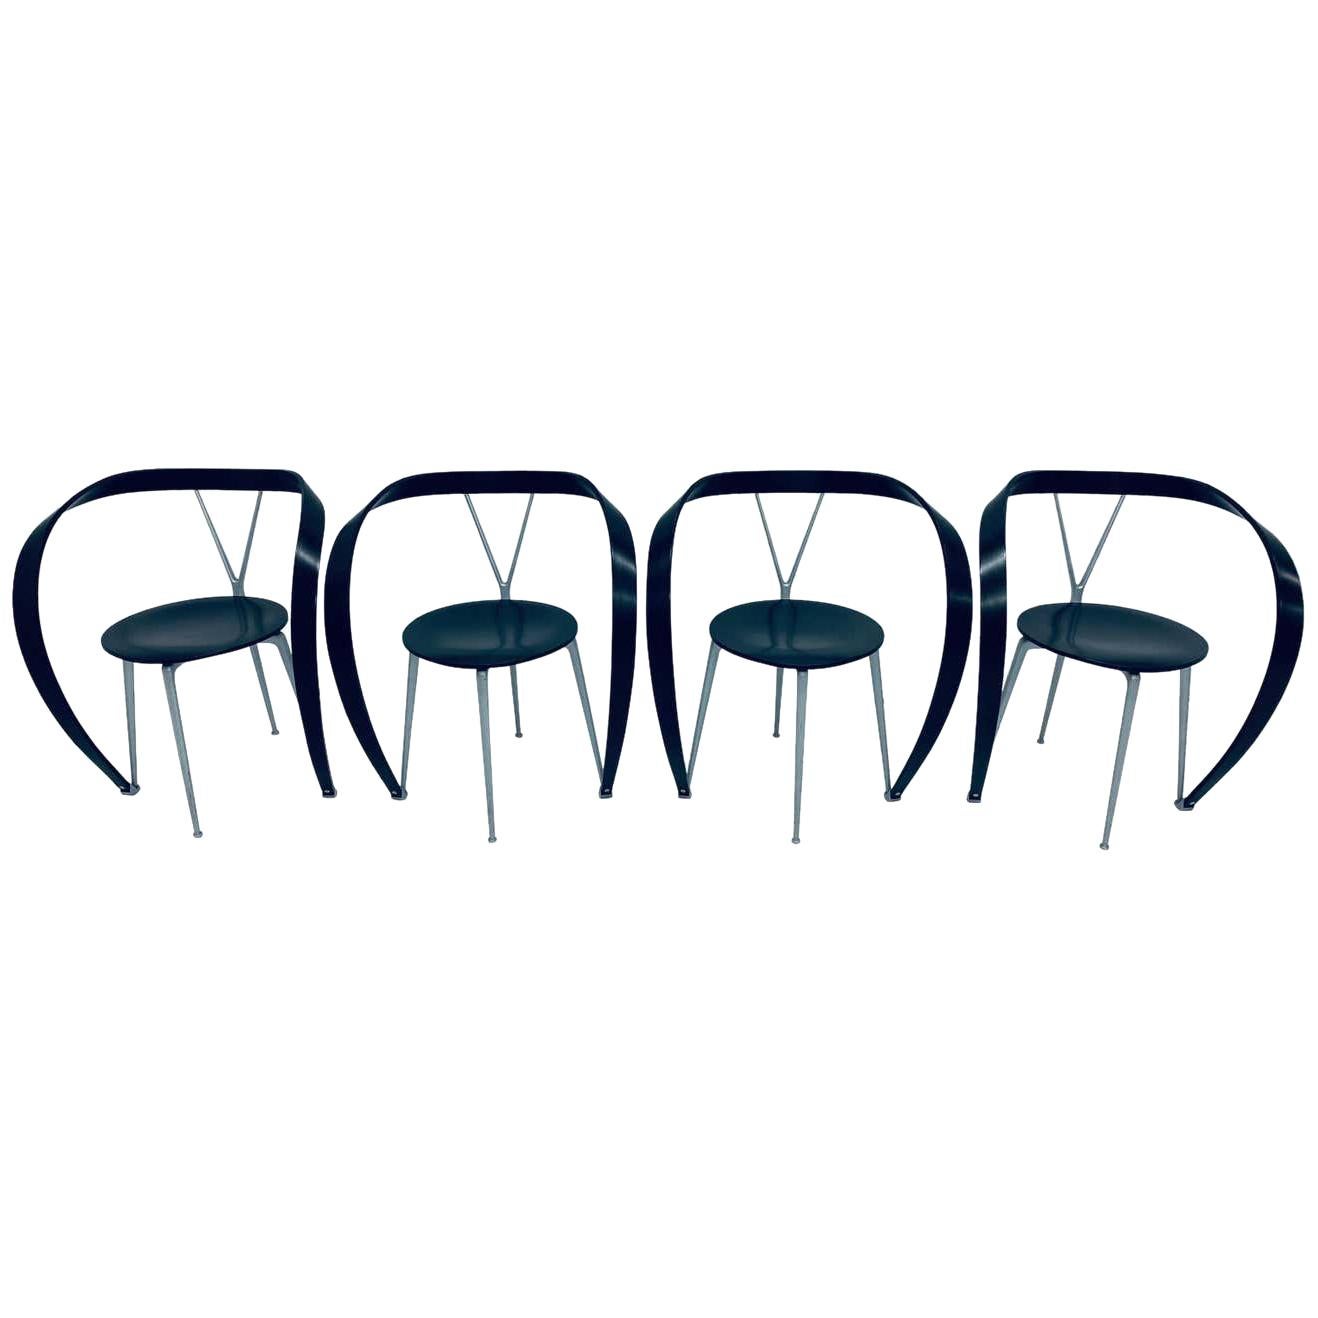 Andrea Branzi "Revers" Dining Arm Chairs for Cassina, 1990s, Three Available